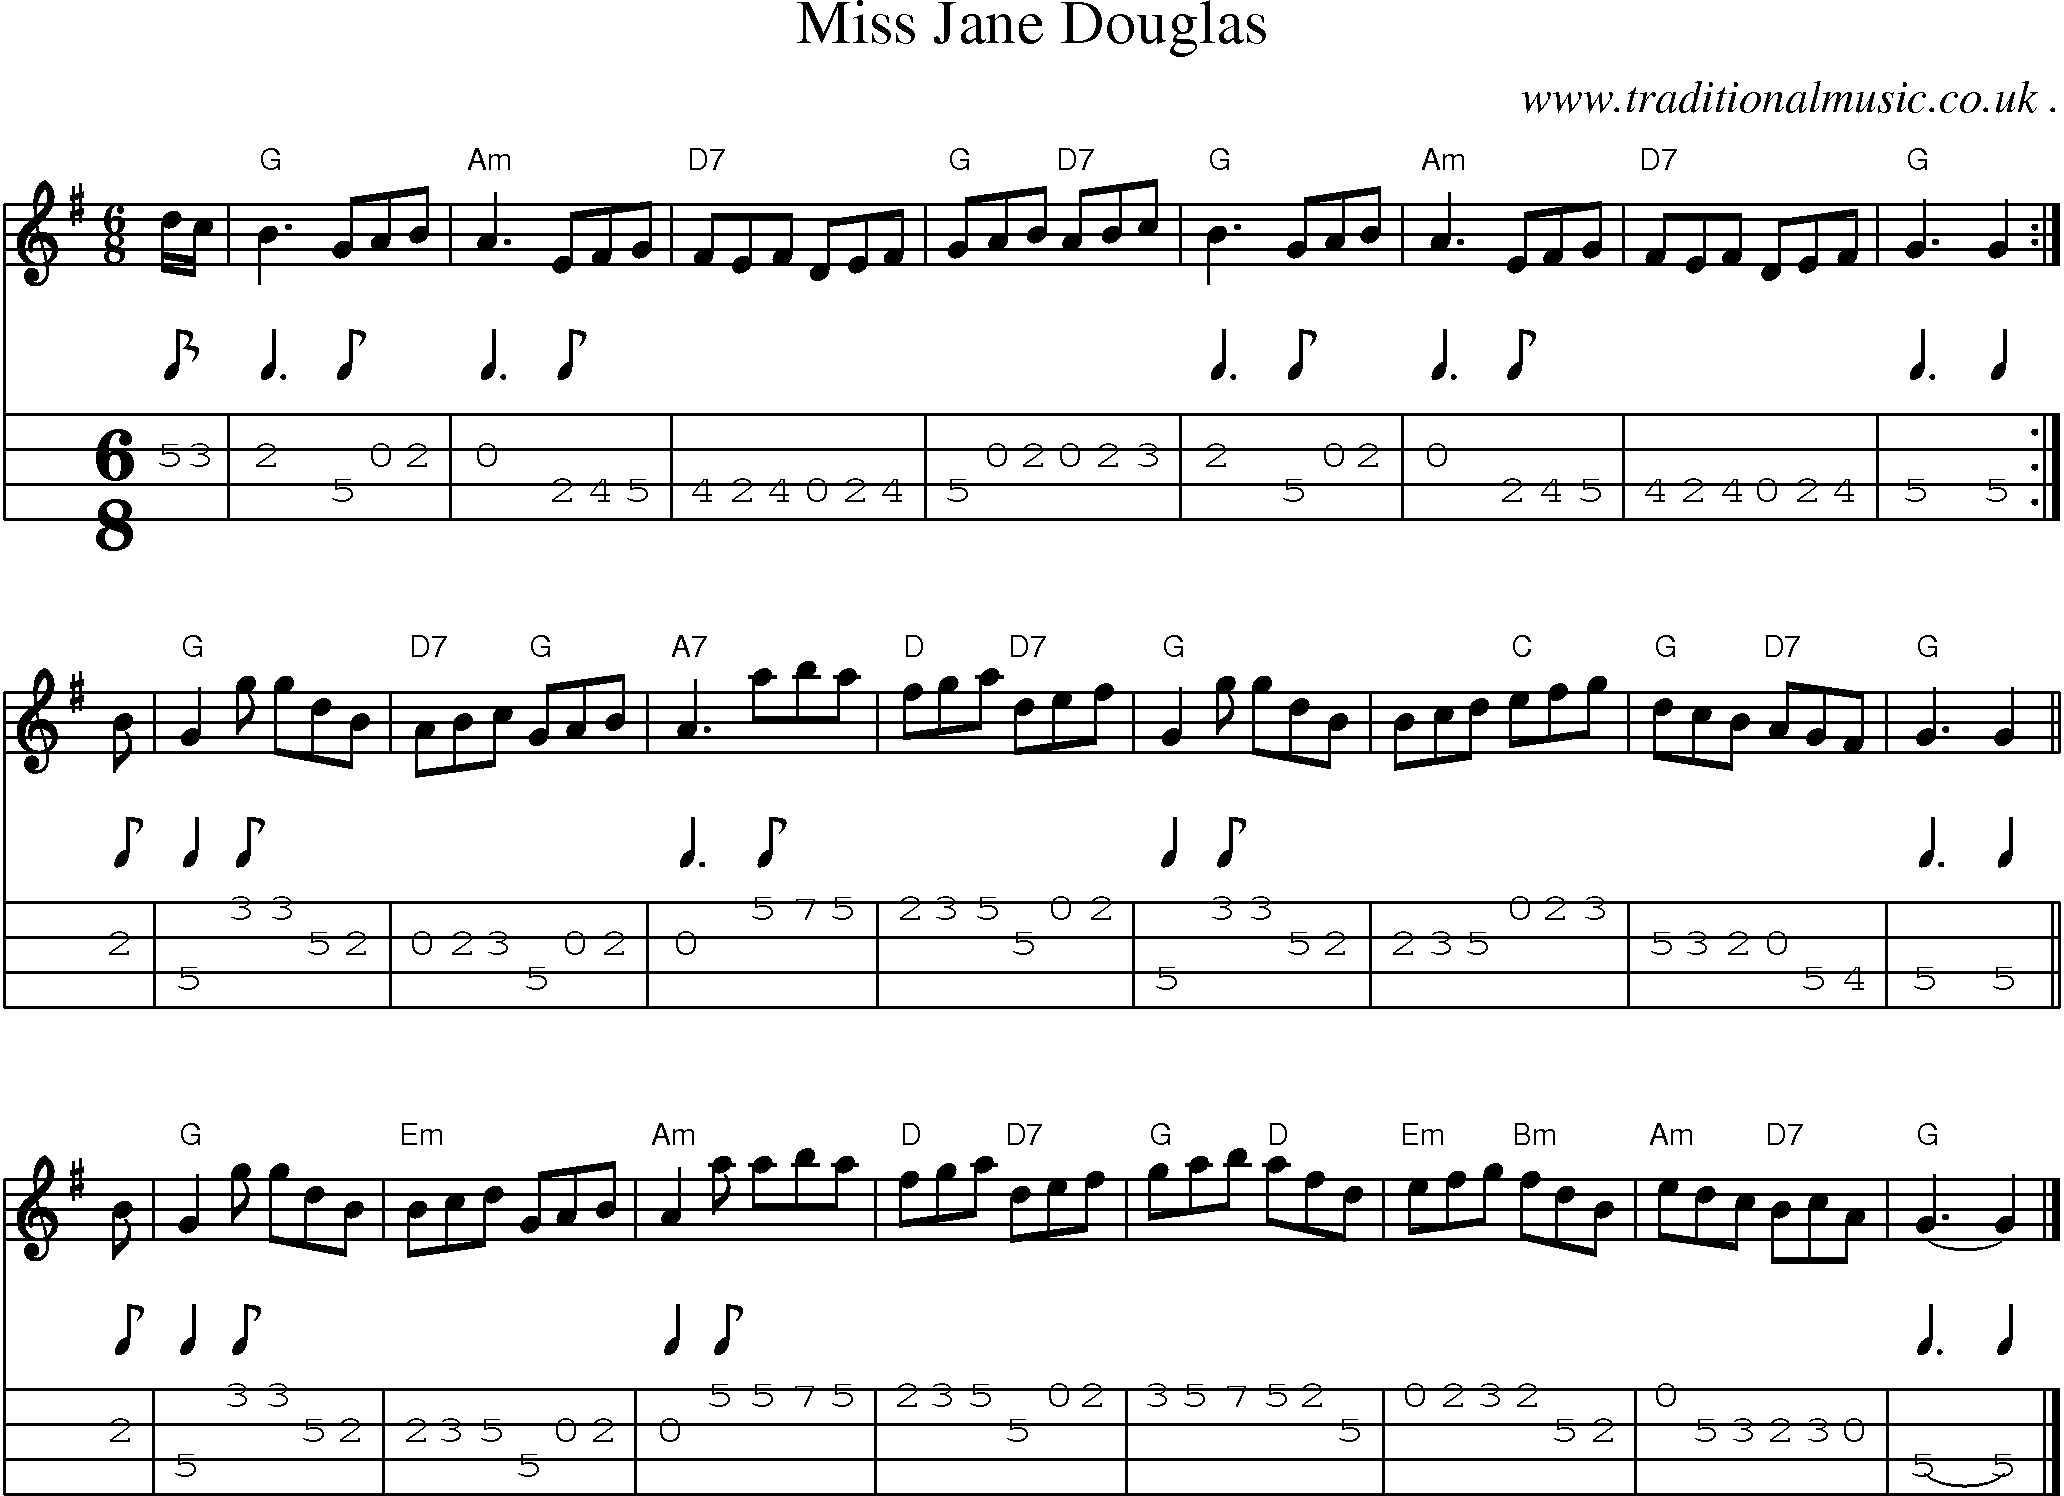 Sheet-music  score, Chords and Mandolin Tabs for Miss Jane Douglas